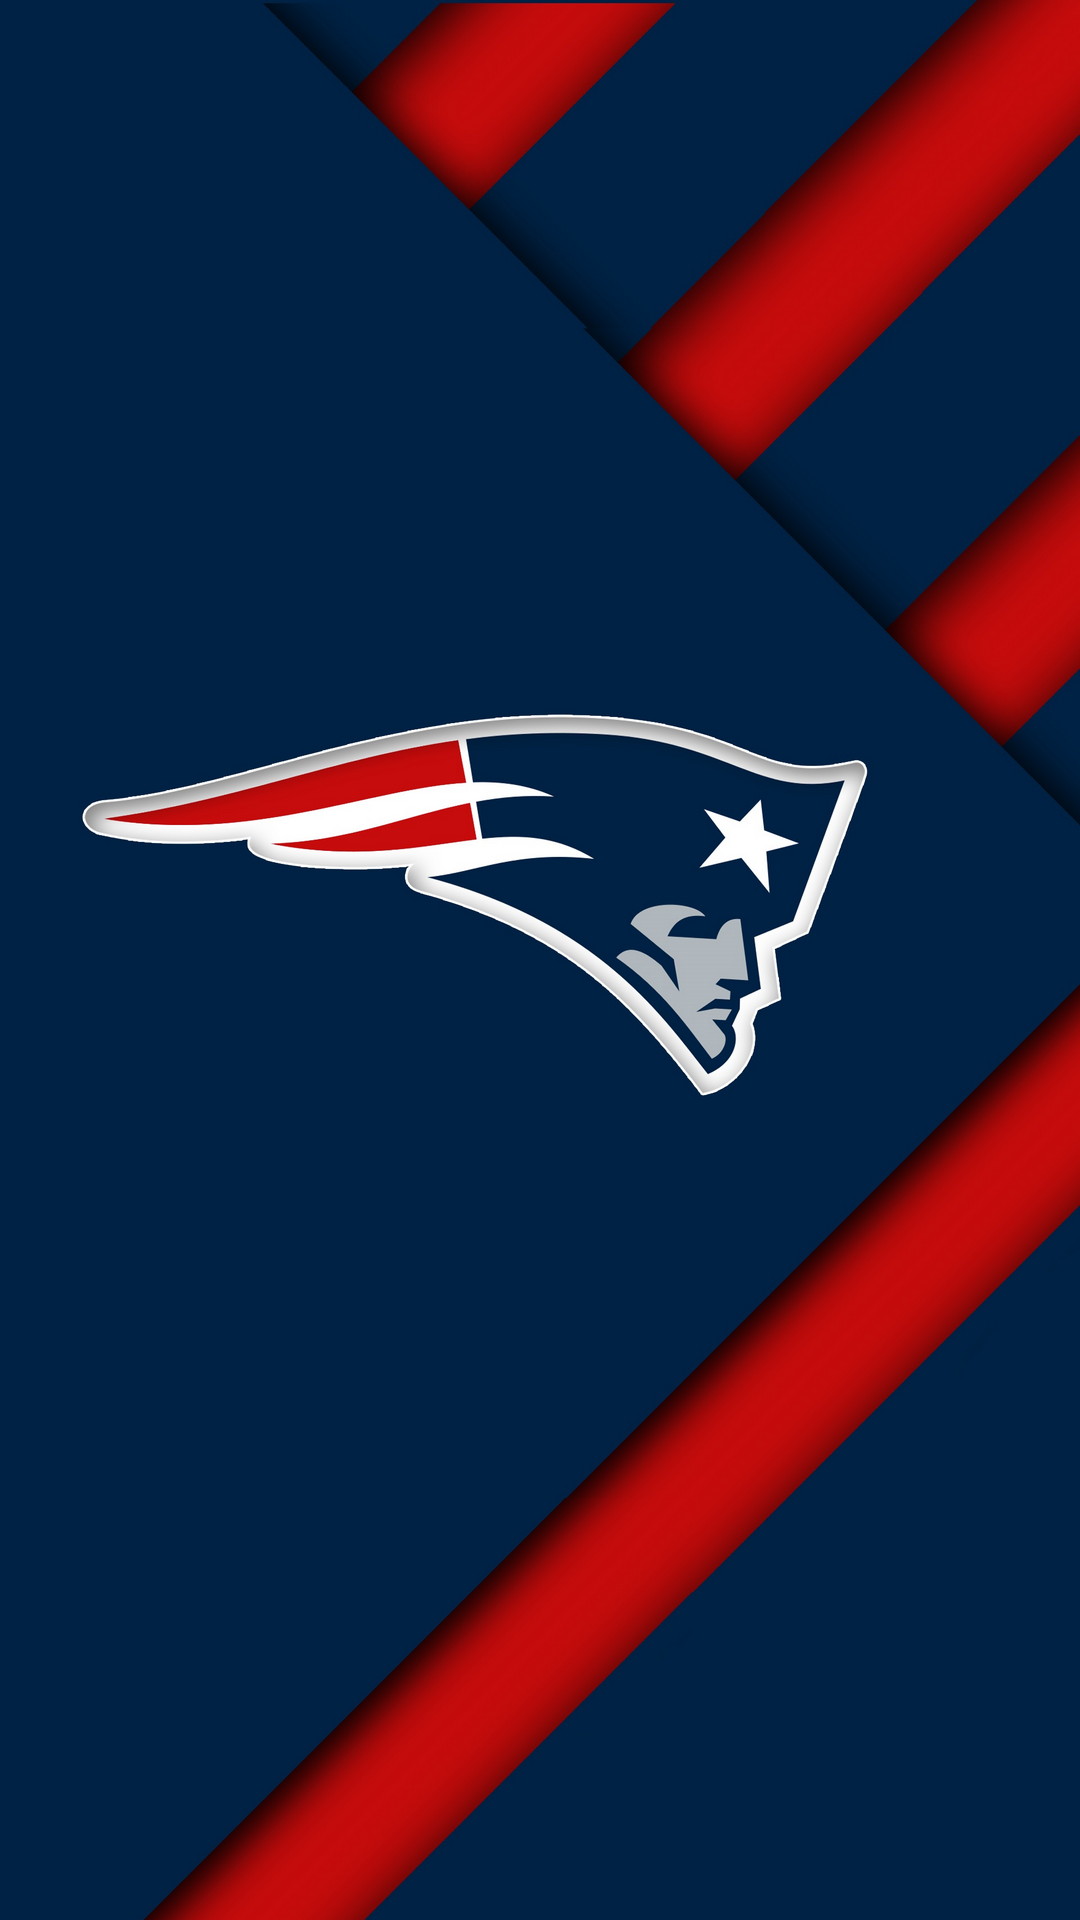 Patriots NFL Wallpaper Mobile with high-resolution 1080x1920 pixel. You can use and set as wallpaper for Notebook Screensavers, Mac Wallpapers, Mobile Home Screen, iPhone or Android Phones Lock Screen